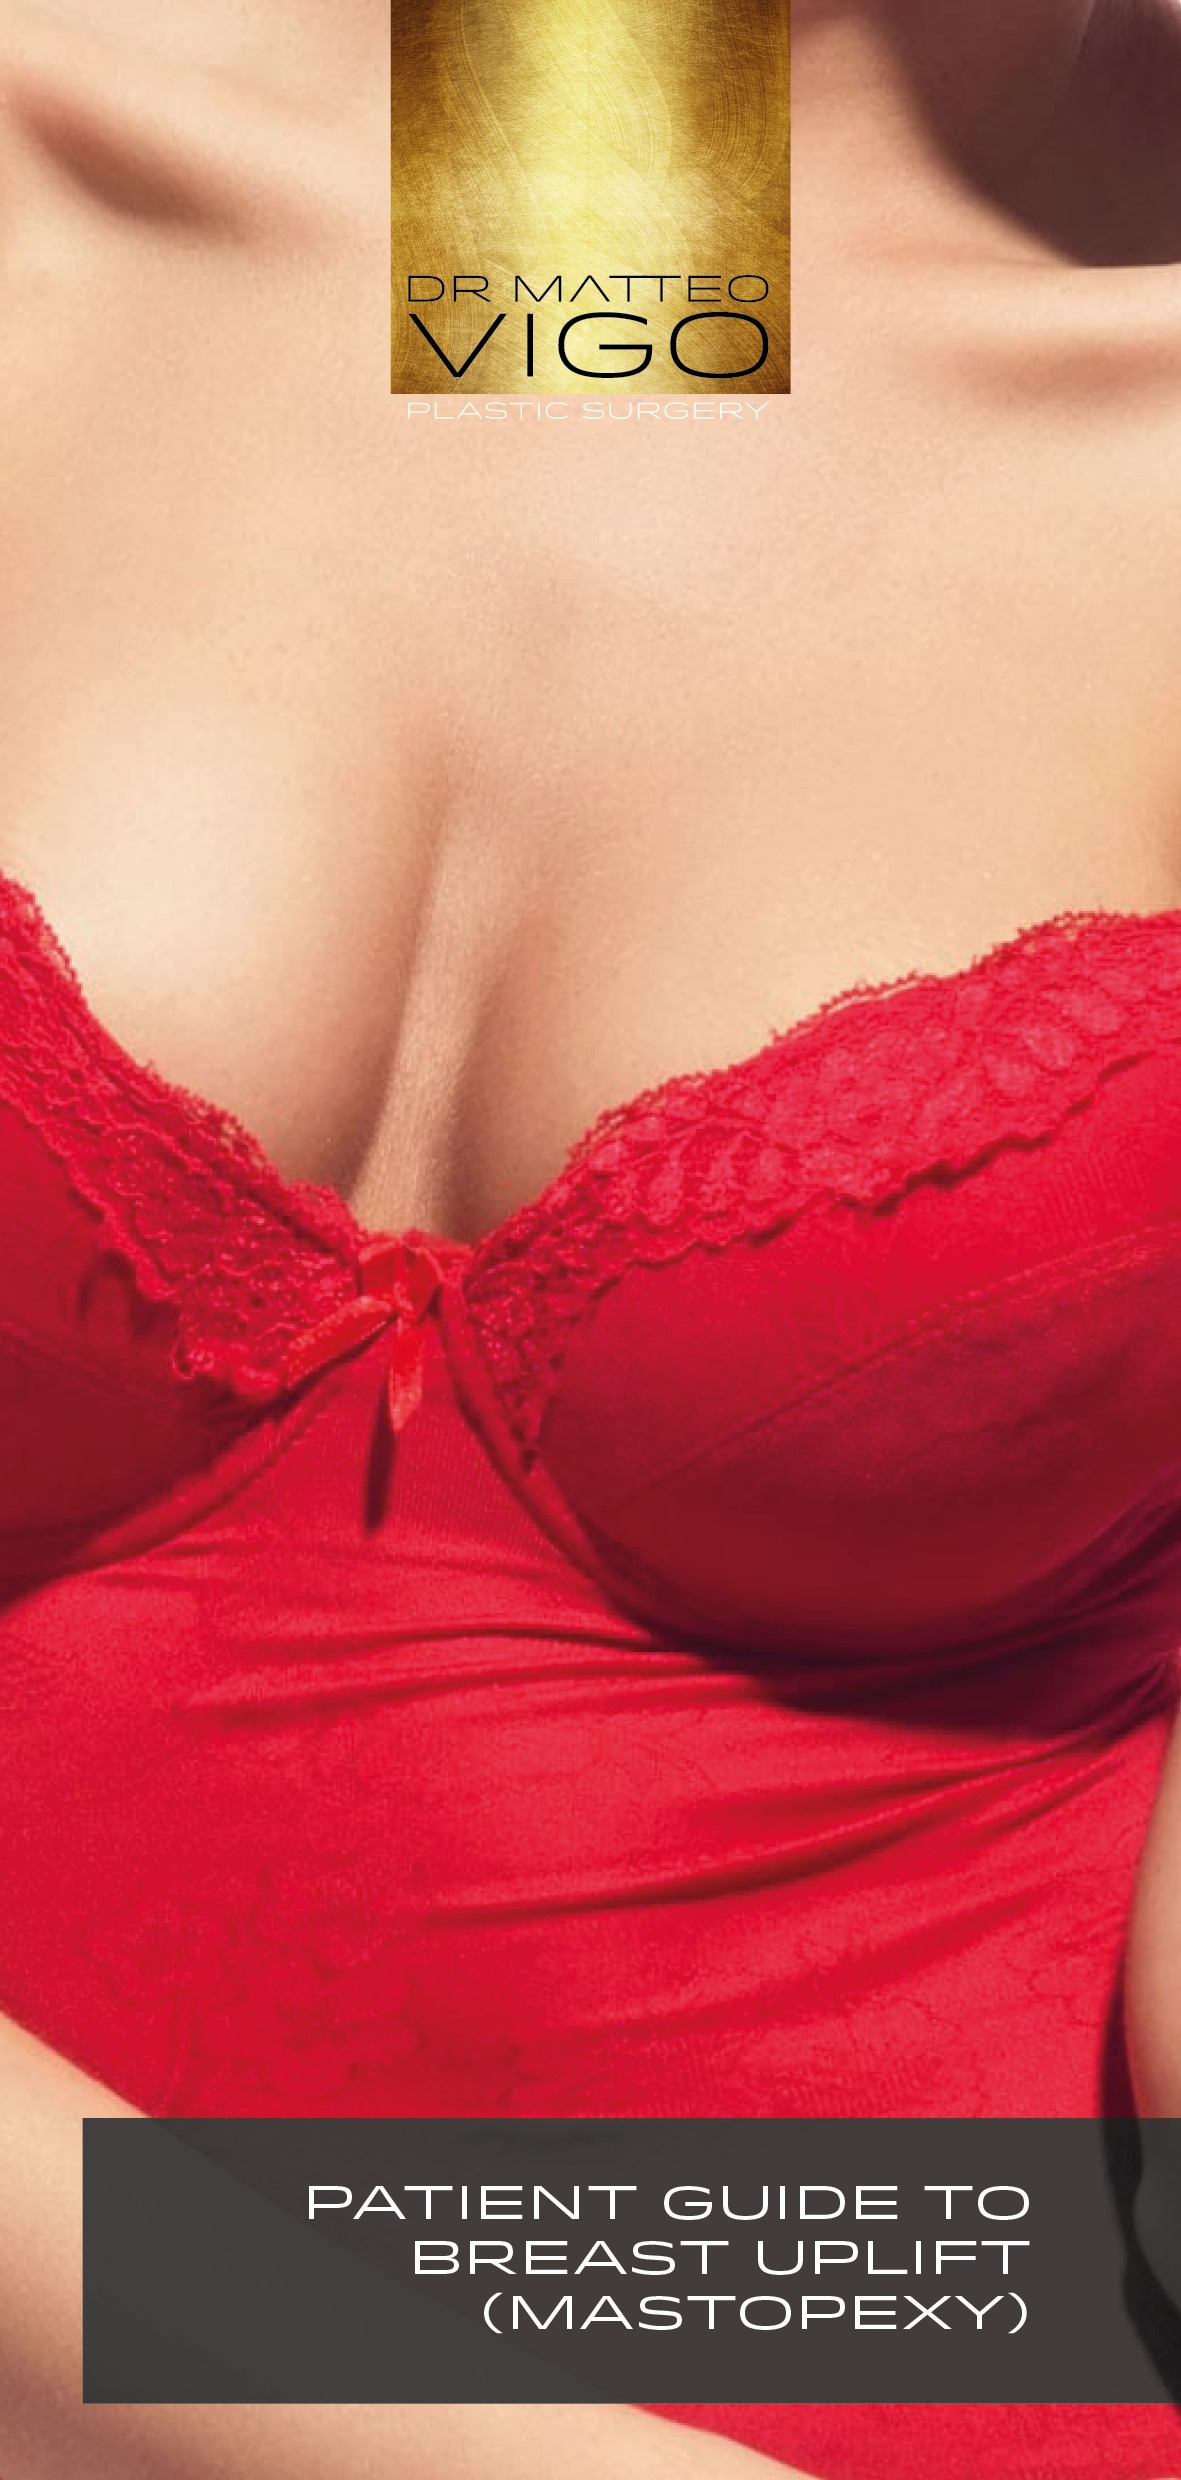 A Patient Guide to Breast Uplift (Mastopexy)